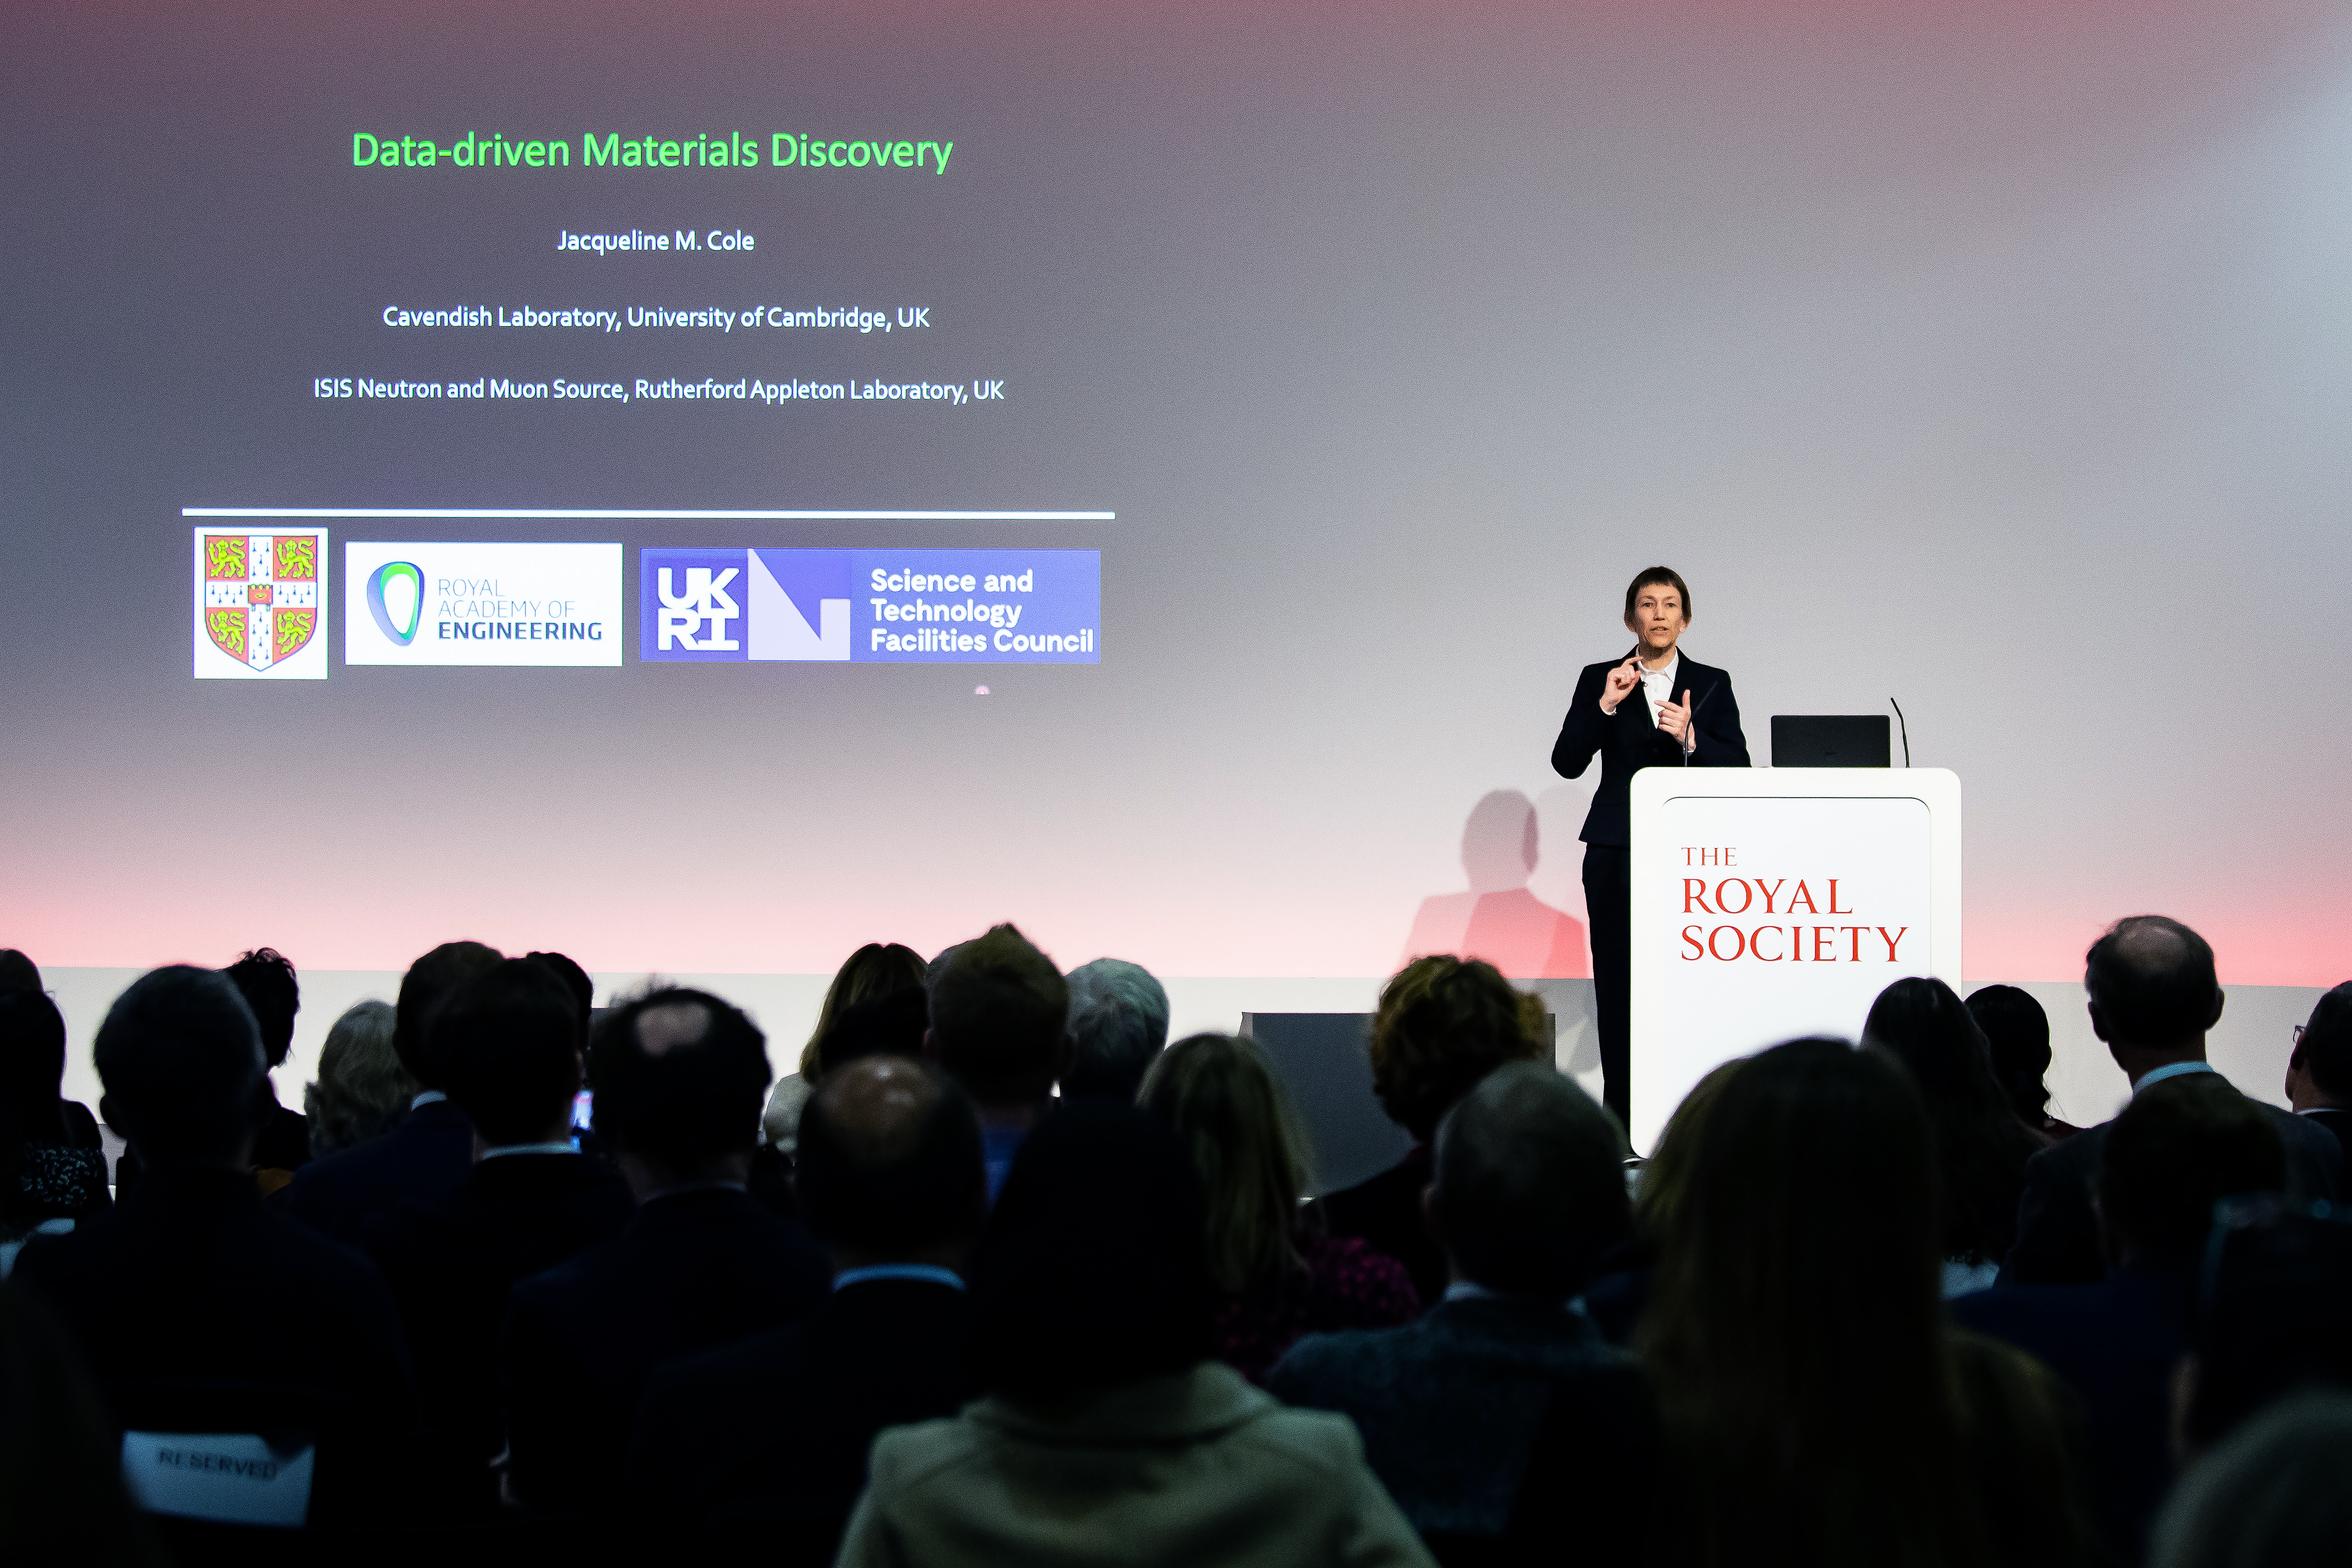 Jacqui stood at a lecturn in front of a crowd, with a slide behind her saying "data-driven materials discovery"